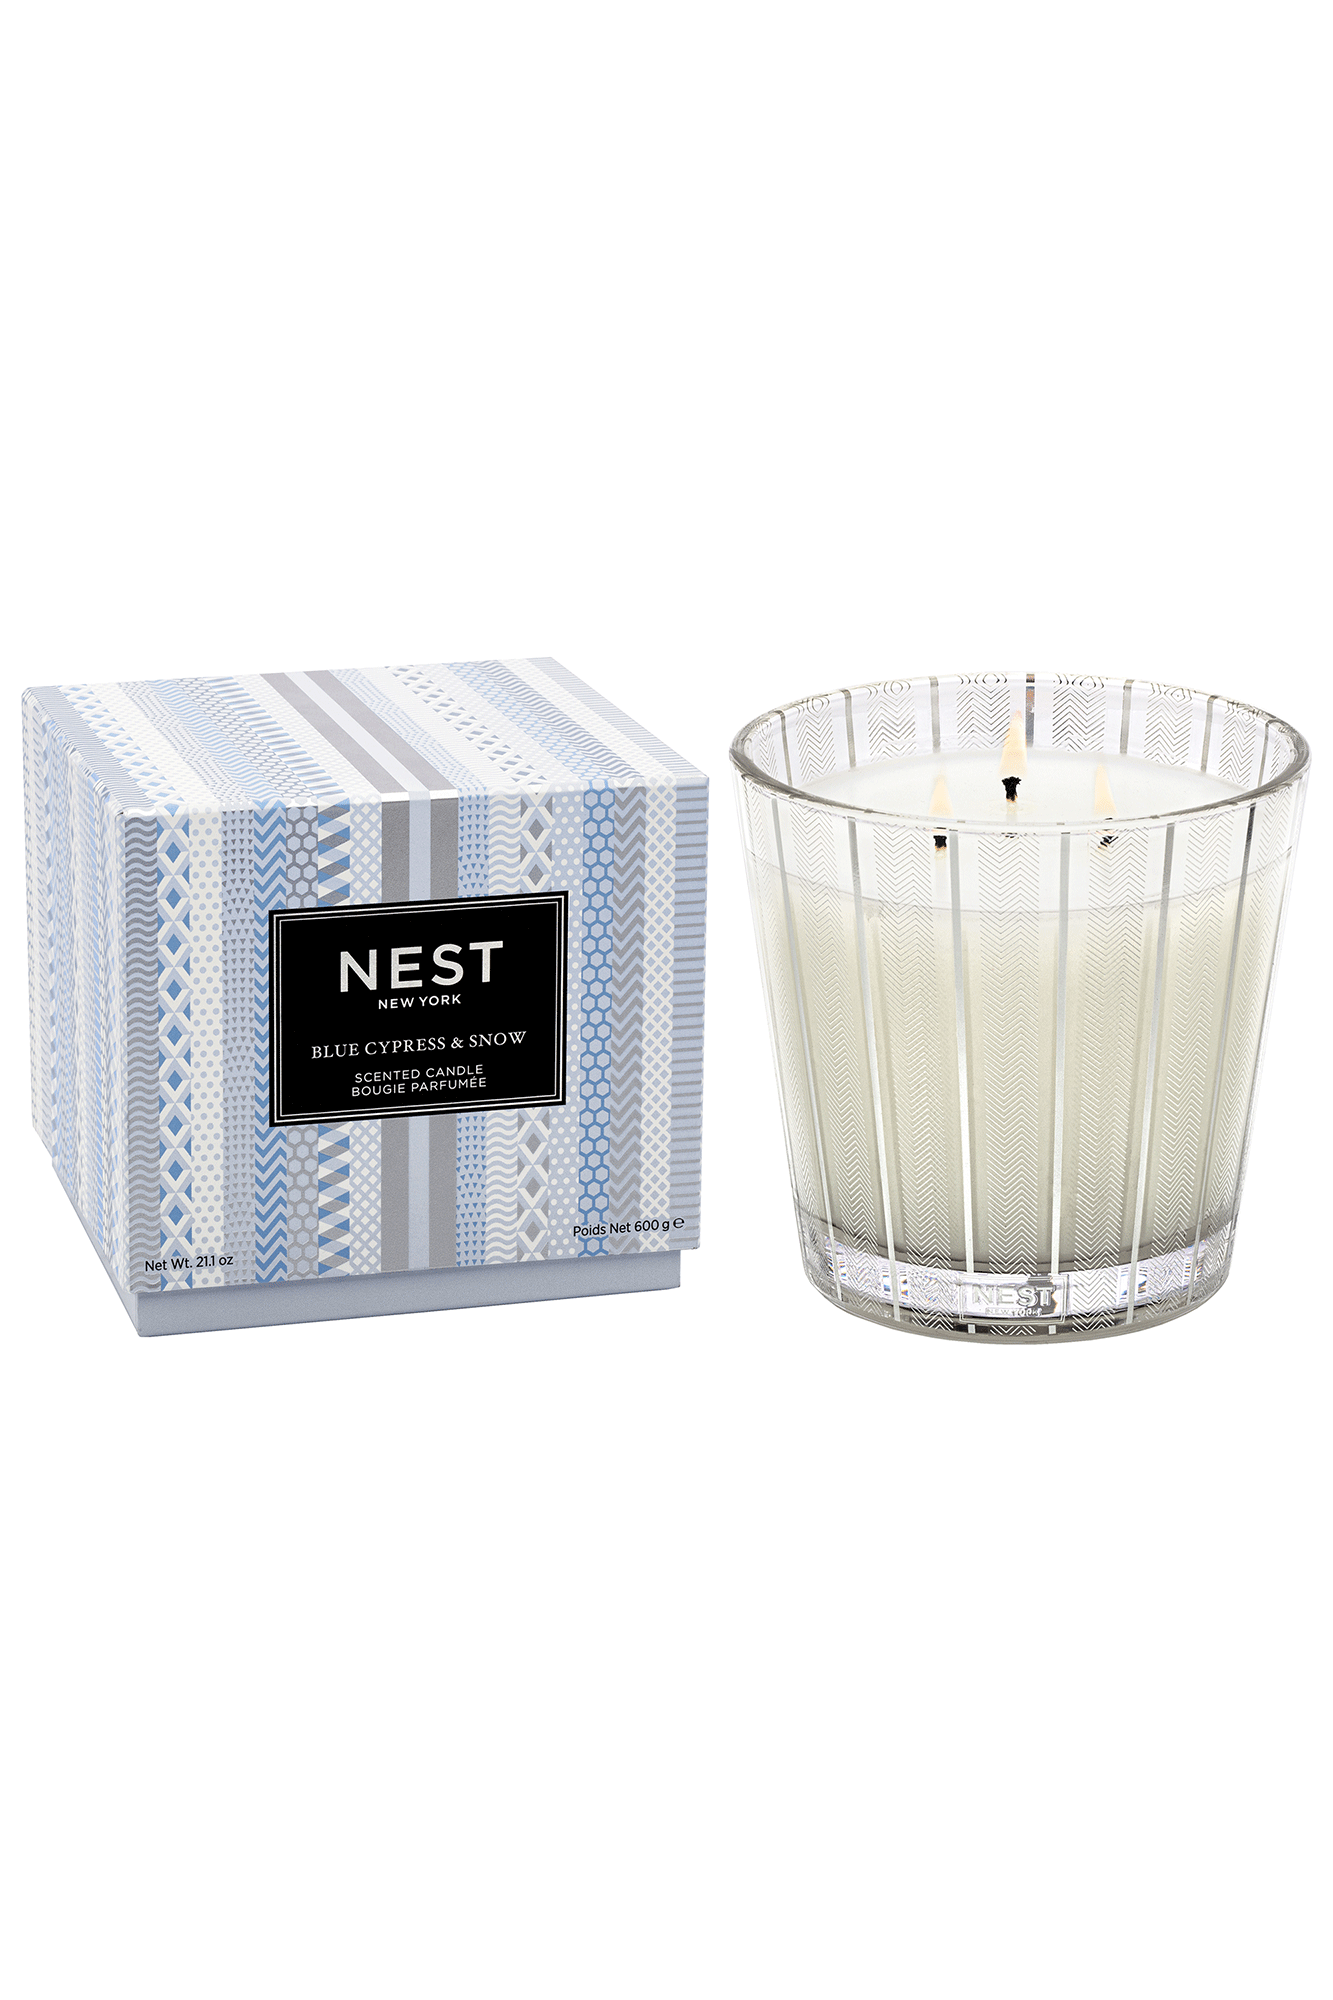 Light up your winter retreat with the Blue Cypress & Snow 3 Wick Candle from Nest. Fill the air with the perfect blend of notes such as blue cypress, juniper berry, and hints of smoked vanilla bean. Enjoy the inviting aroma of a mountain escape with this inviting 3-wick candle.